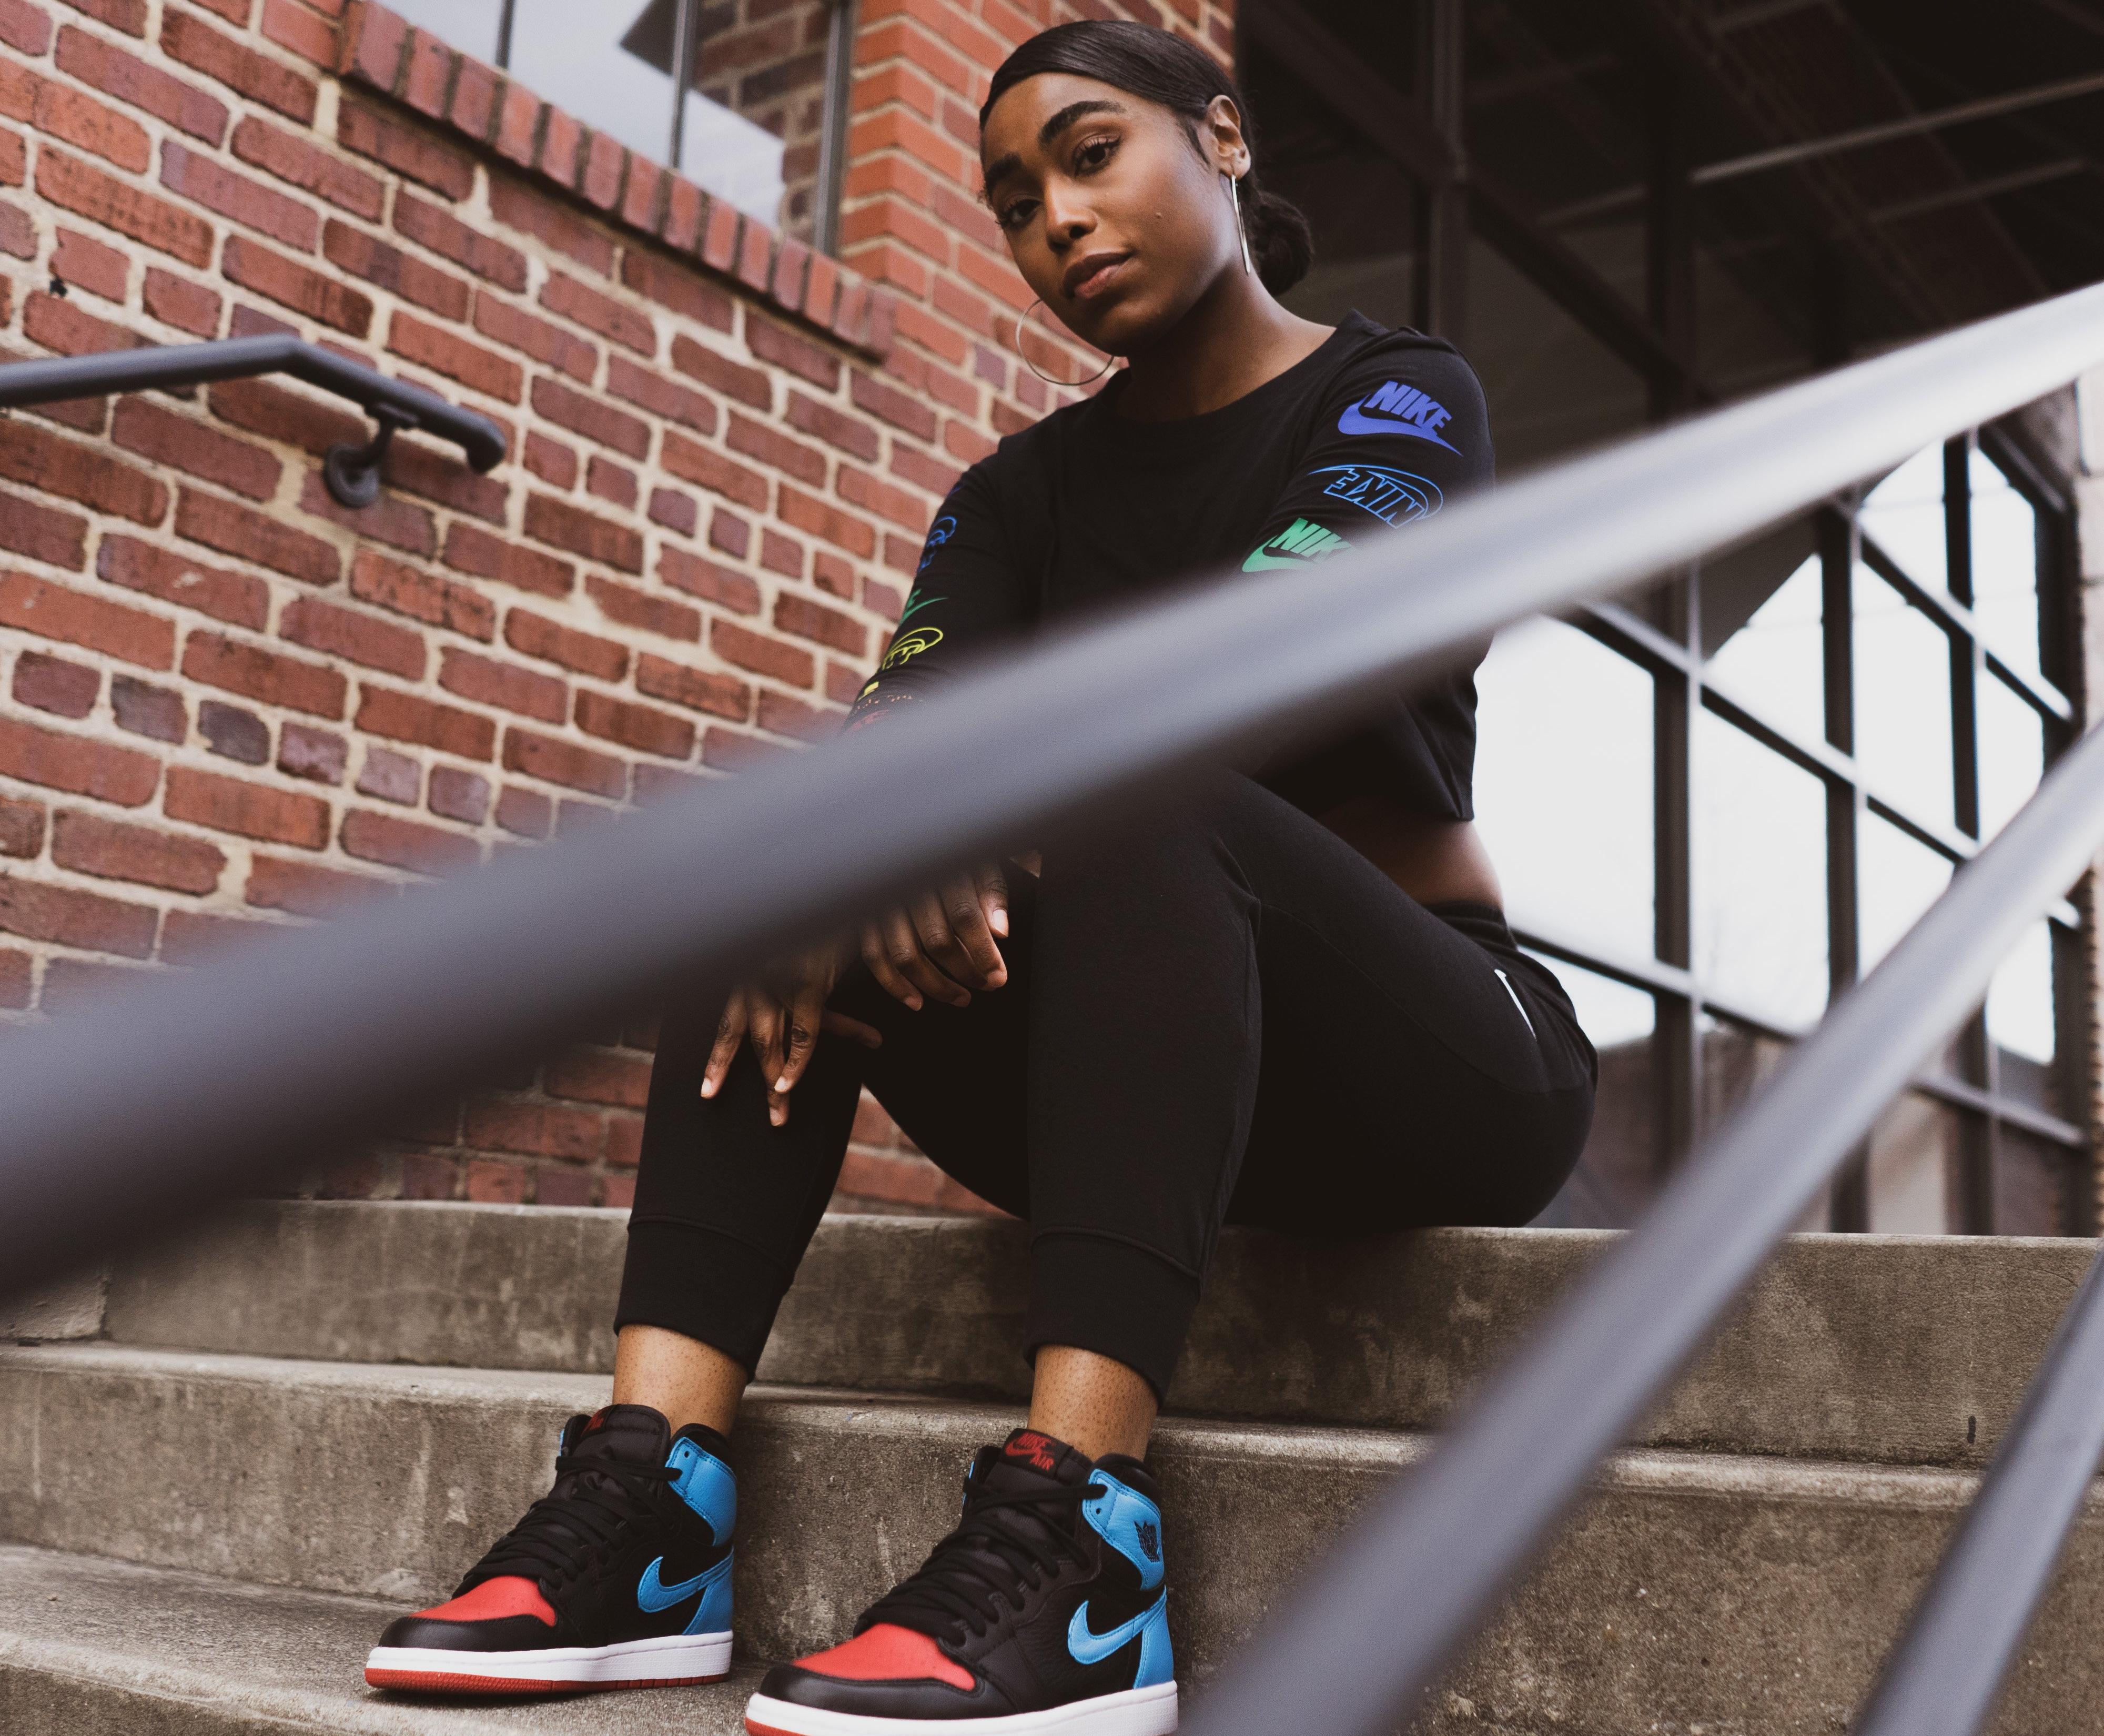 Dare nul asiatisk Sneakers Release &#8211; Air Jordan 1 High OG &#8220;UNC to Chicago&#8221;  Black/Powder Blue/Gym Red Women&#8217;s and Kids&#8217; Basketball Shoe